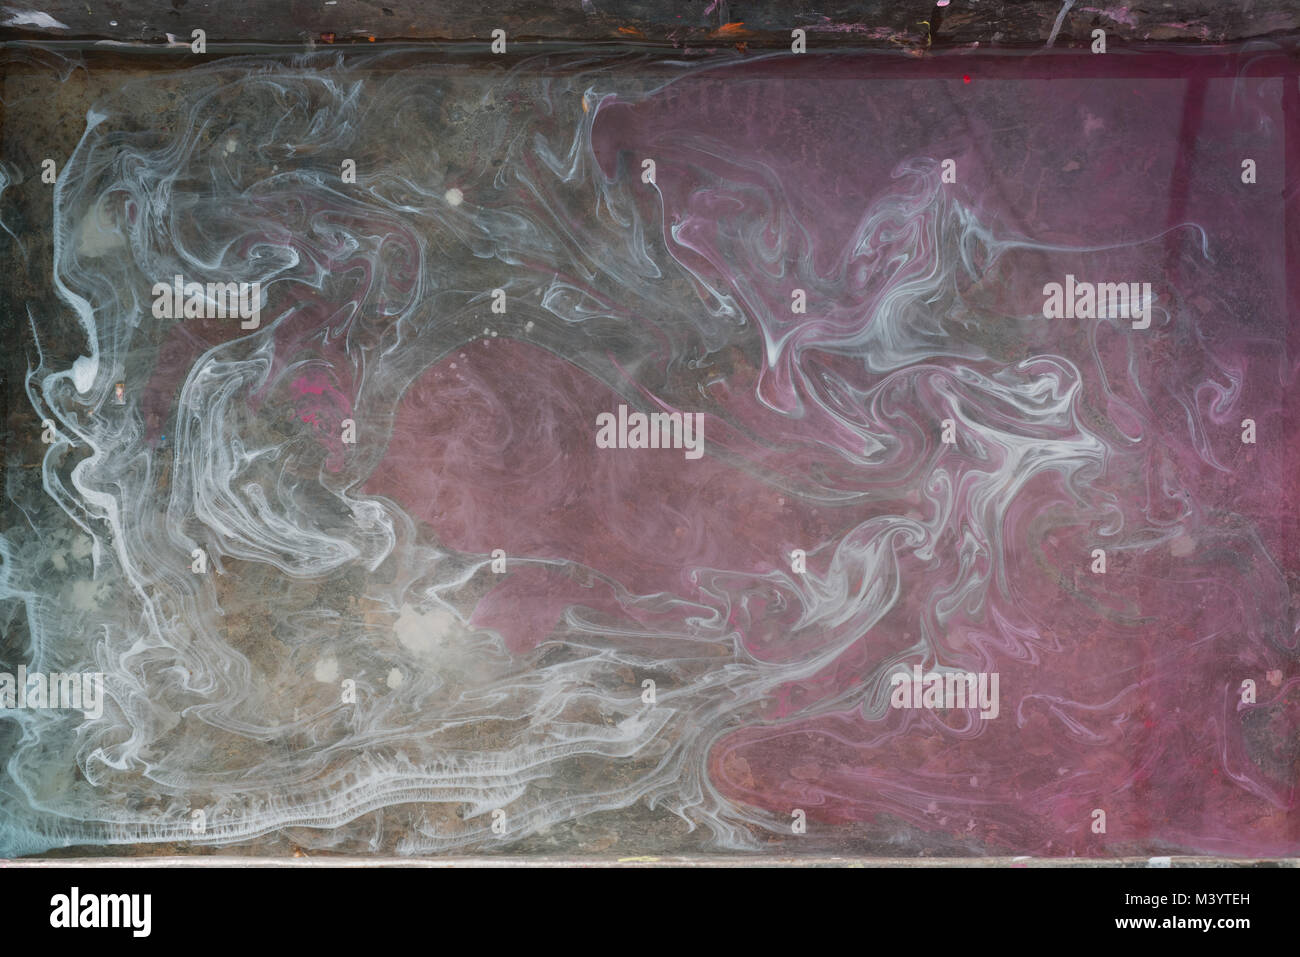 Abstract design background from a mixture of watercolor paints: the gray whirlwinds on the left break into a matte pink background. Stock Photo